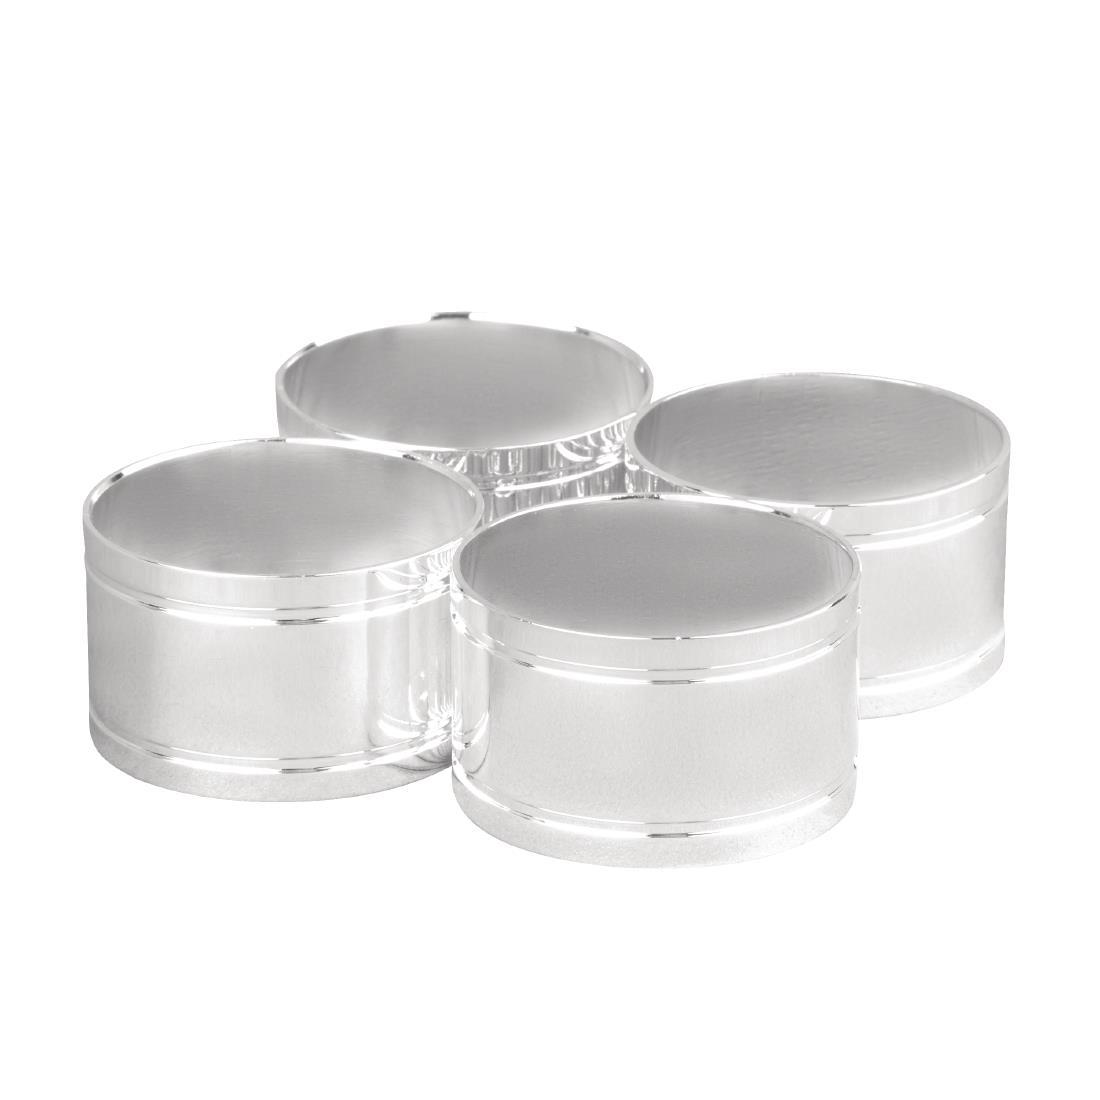 Silver Plated Napkin Rings (Pack of 4) - P904  - 2